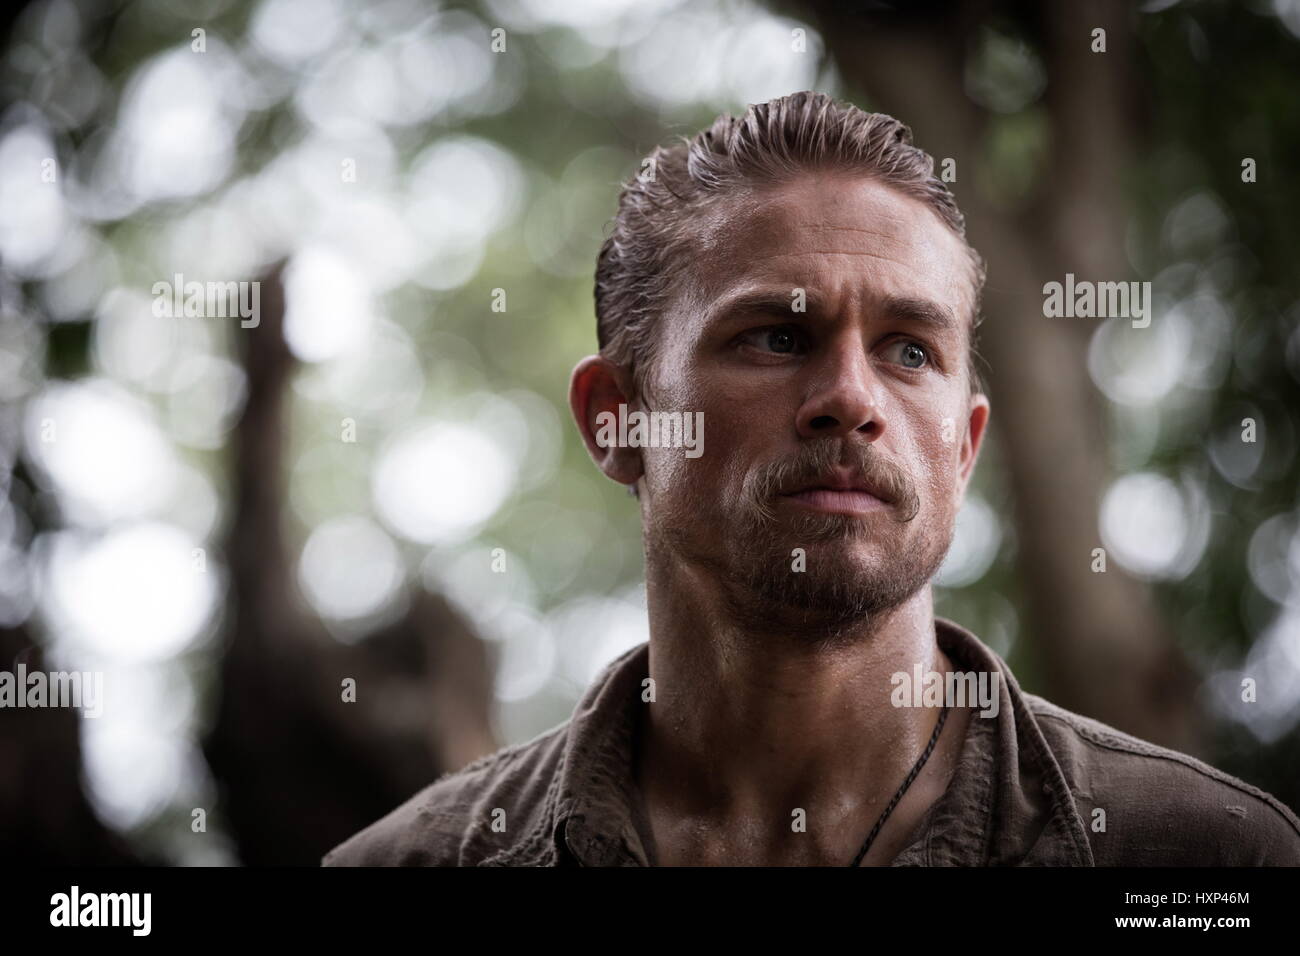 RELEASE DATE: April 14, 2017 TITLE: The Lost City Of Z STUDIO: Amazon Studios DIRECTOR: James Gray PLOT: A true-life drama, centering on British explorer Col. Percival Fawcett, who disappeared while searching for a mysterious city in the Amazon in the 1920s STARRING: Charlie Hunnam as Percy Fawcett (Credit: © Amazon Studios/Entertainment Pictures/ZUMAPRESS.com) Stock Photo